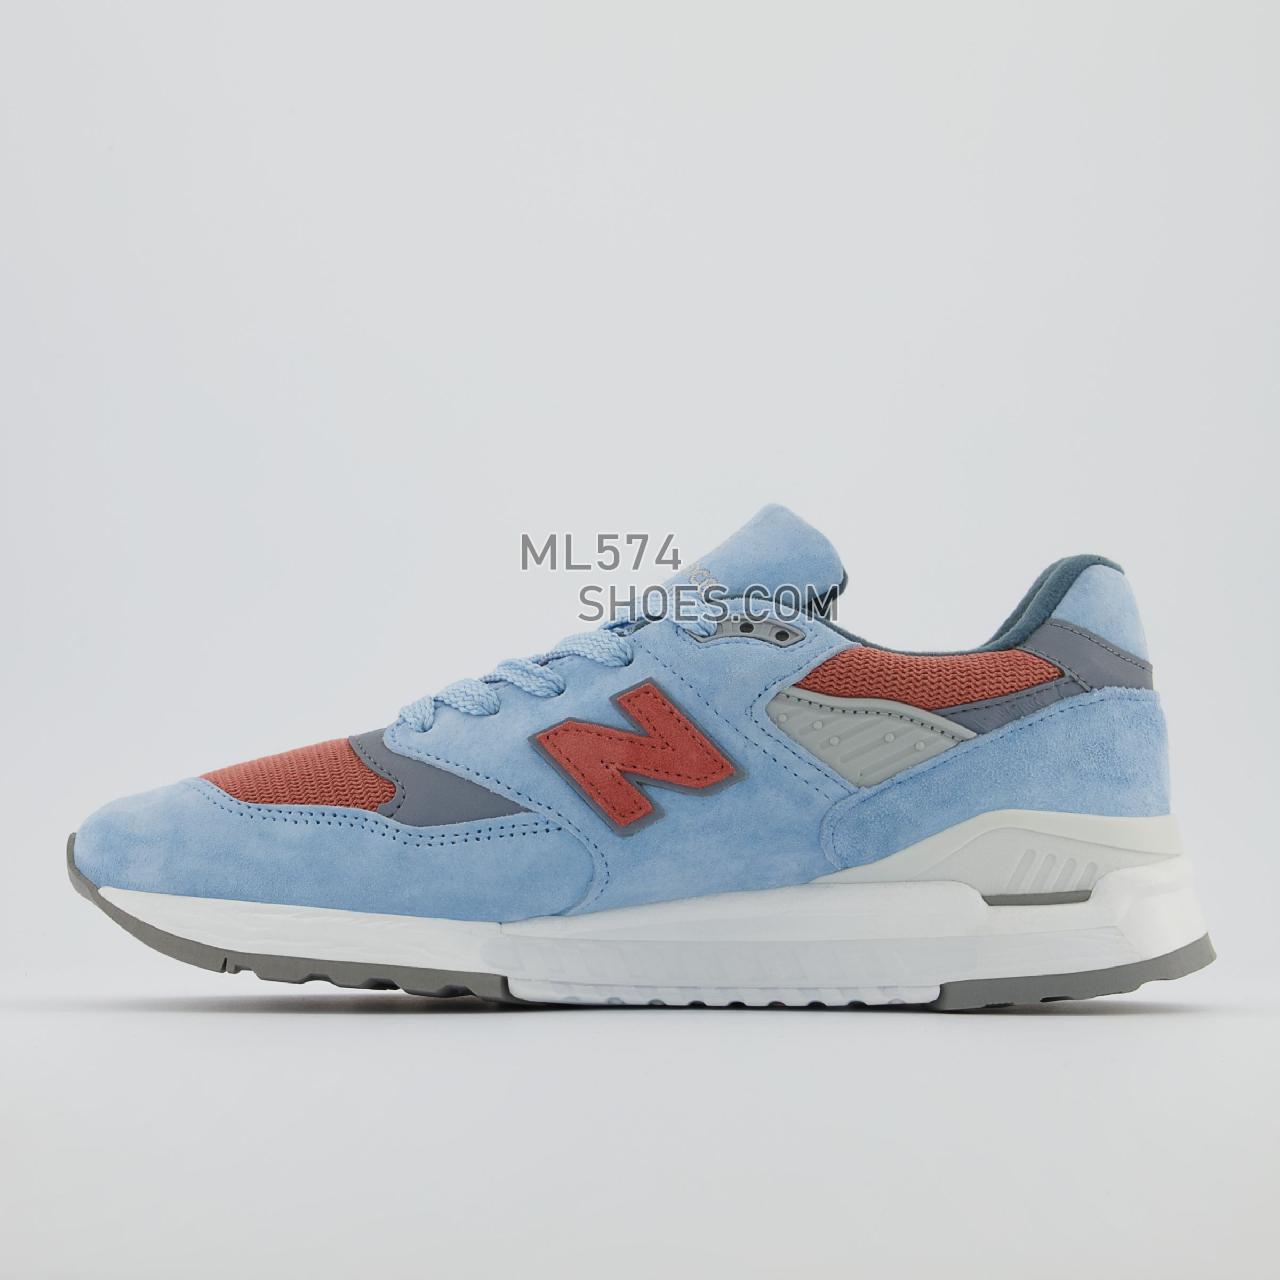 New Balance Made Responsibly 998 - Unisex Men's Women's Made in USA And UK Sneakers - Multi - US998MR